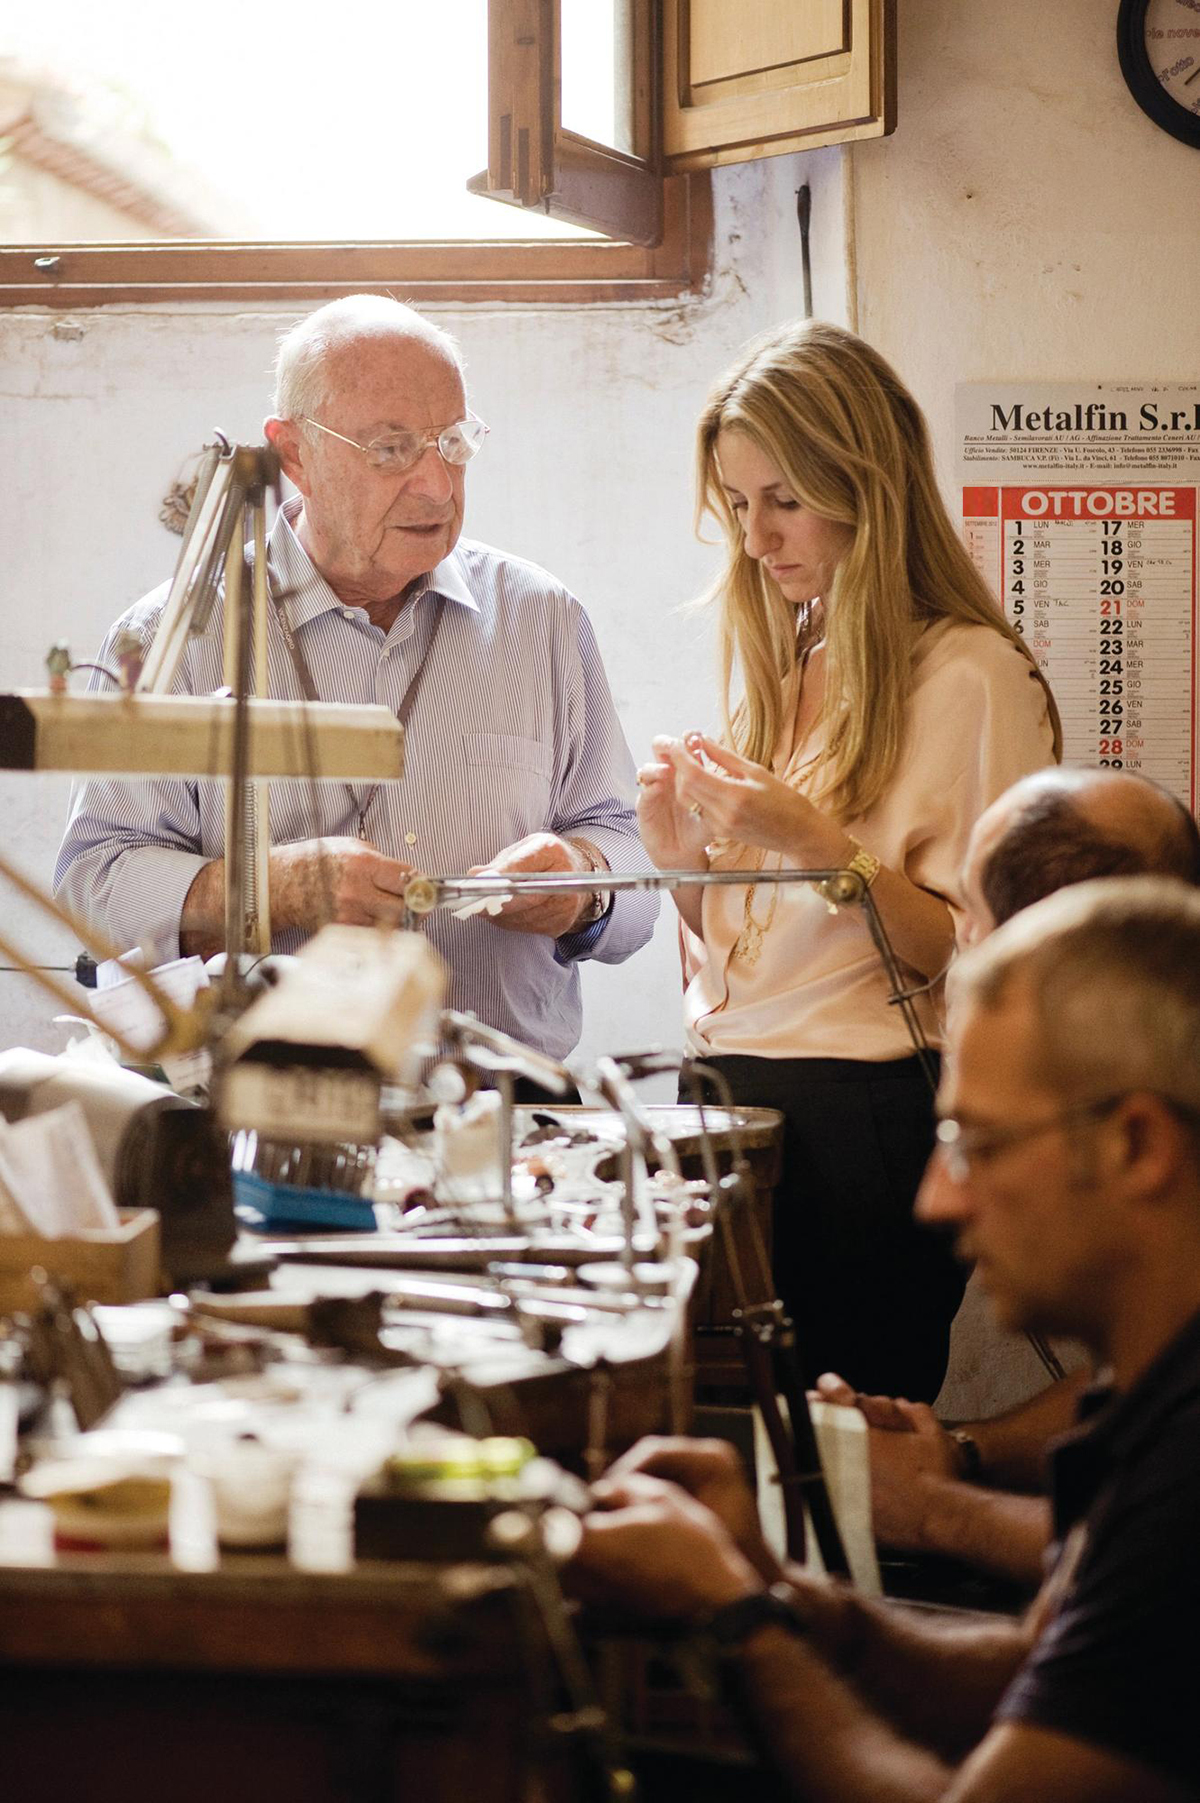 A woman working with an older man in a workshop